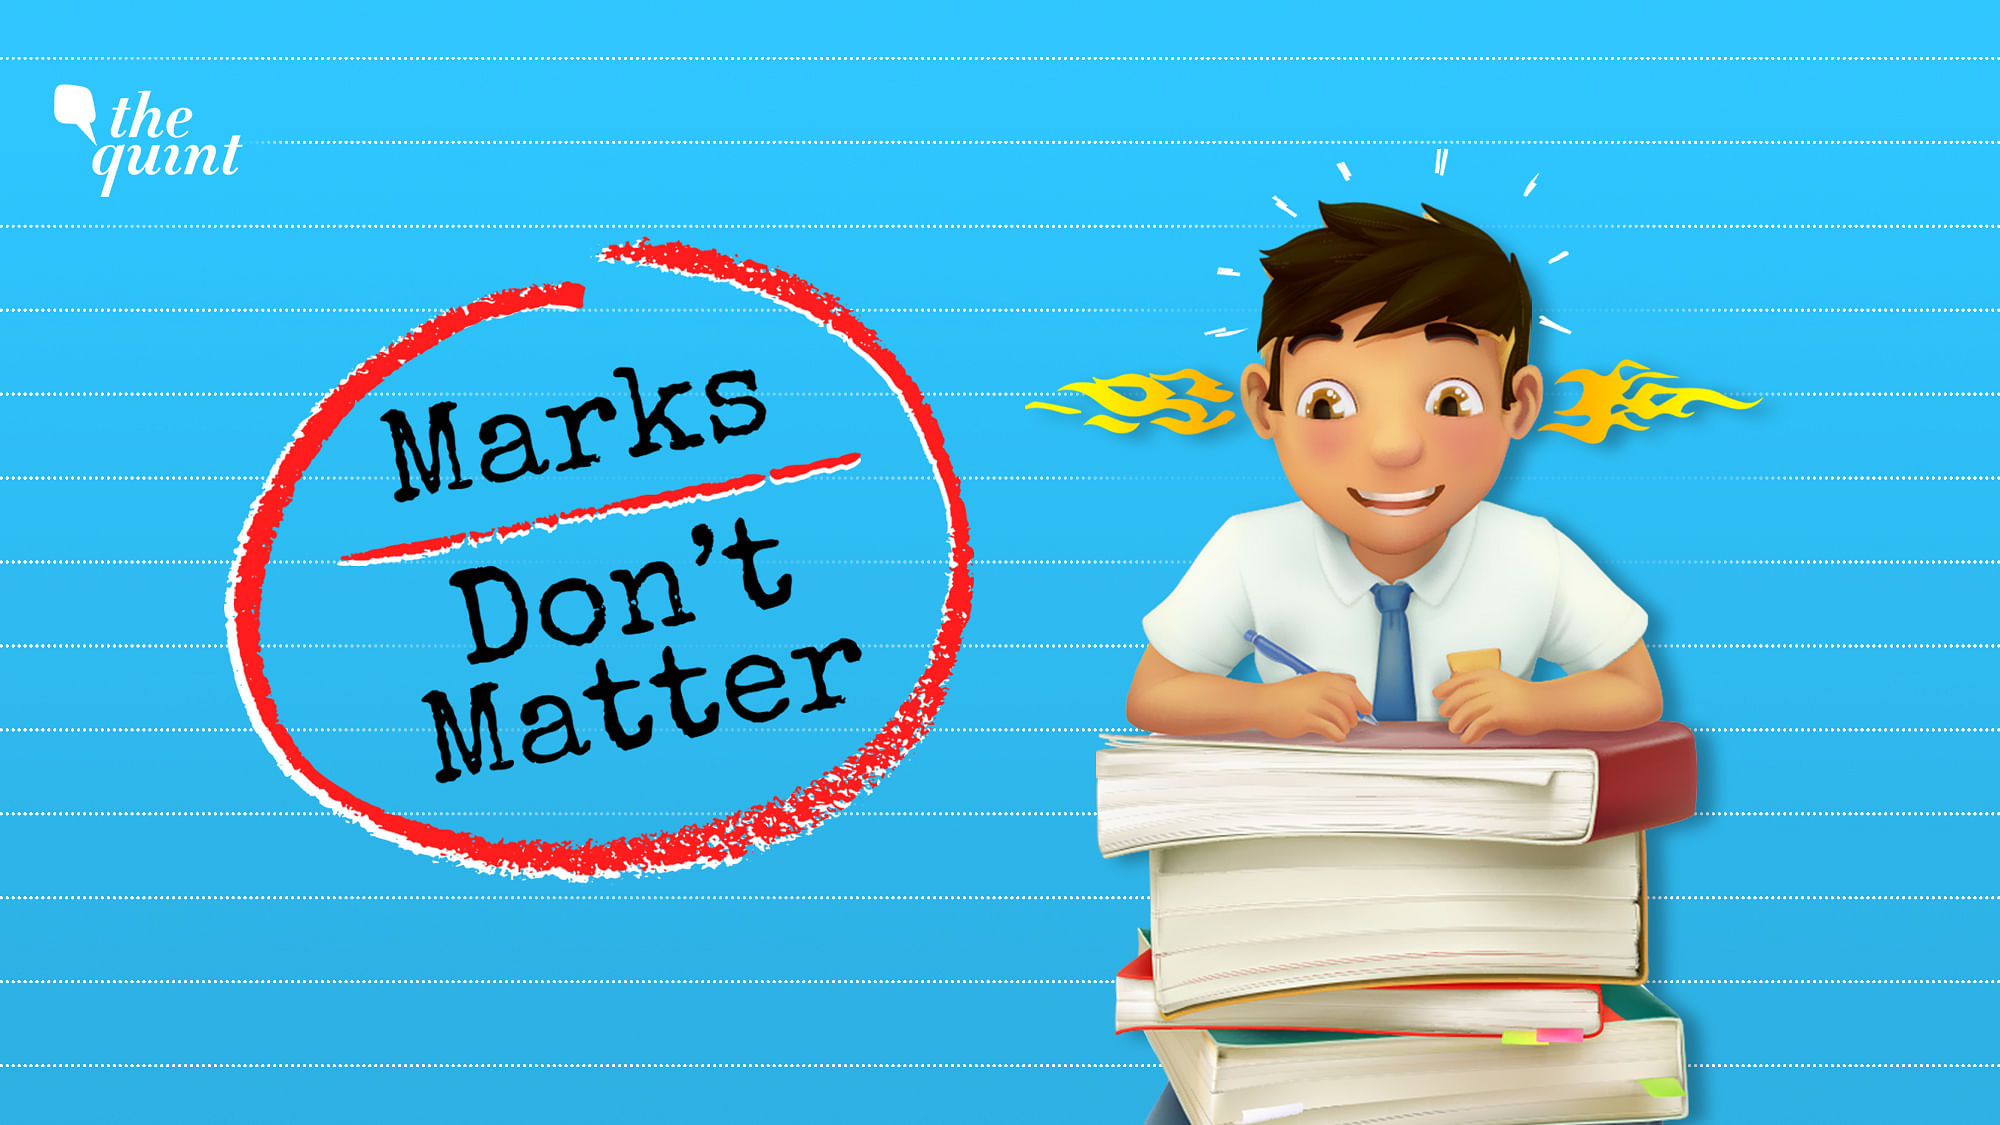 The Quint wants you to know #MarksDontMatter